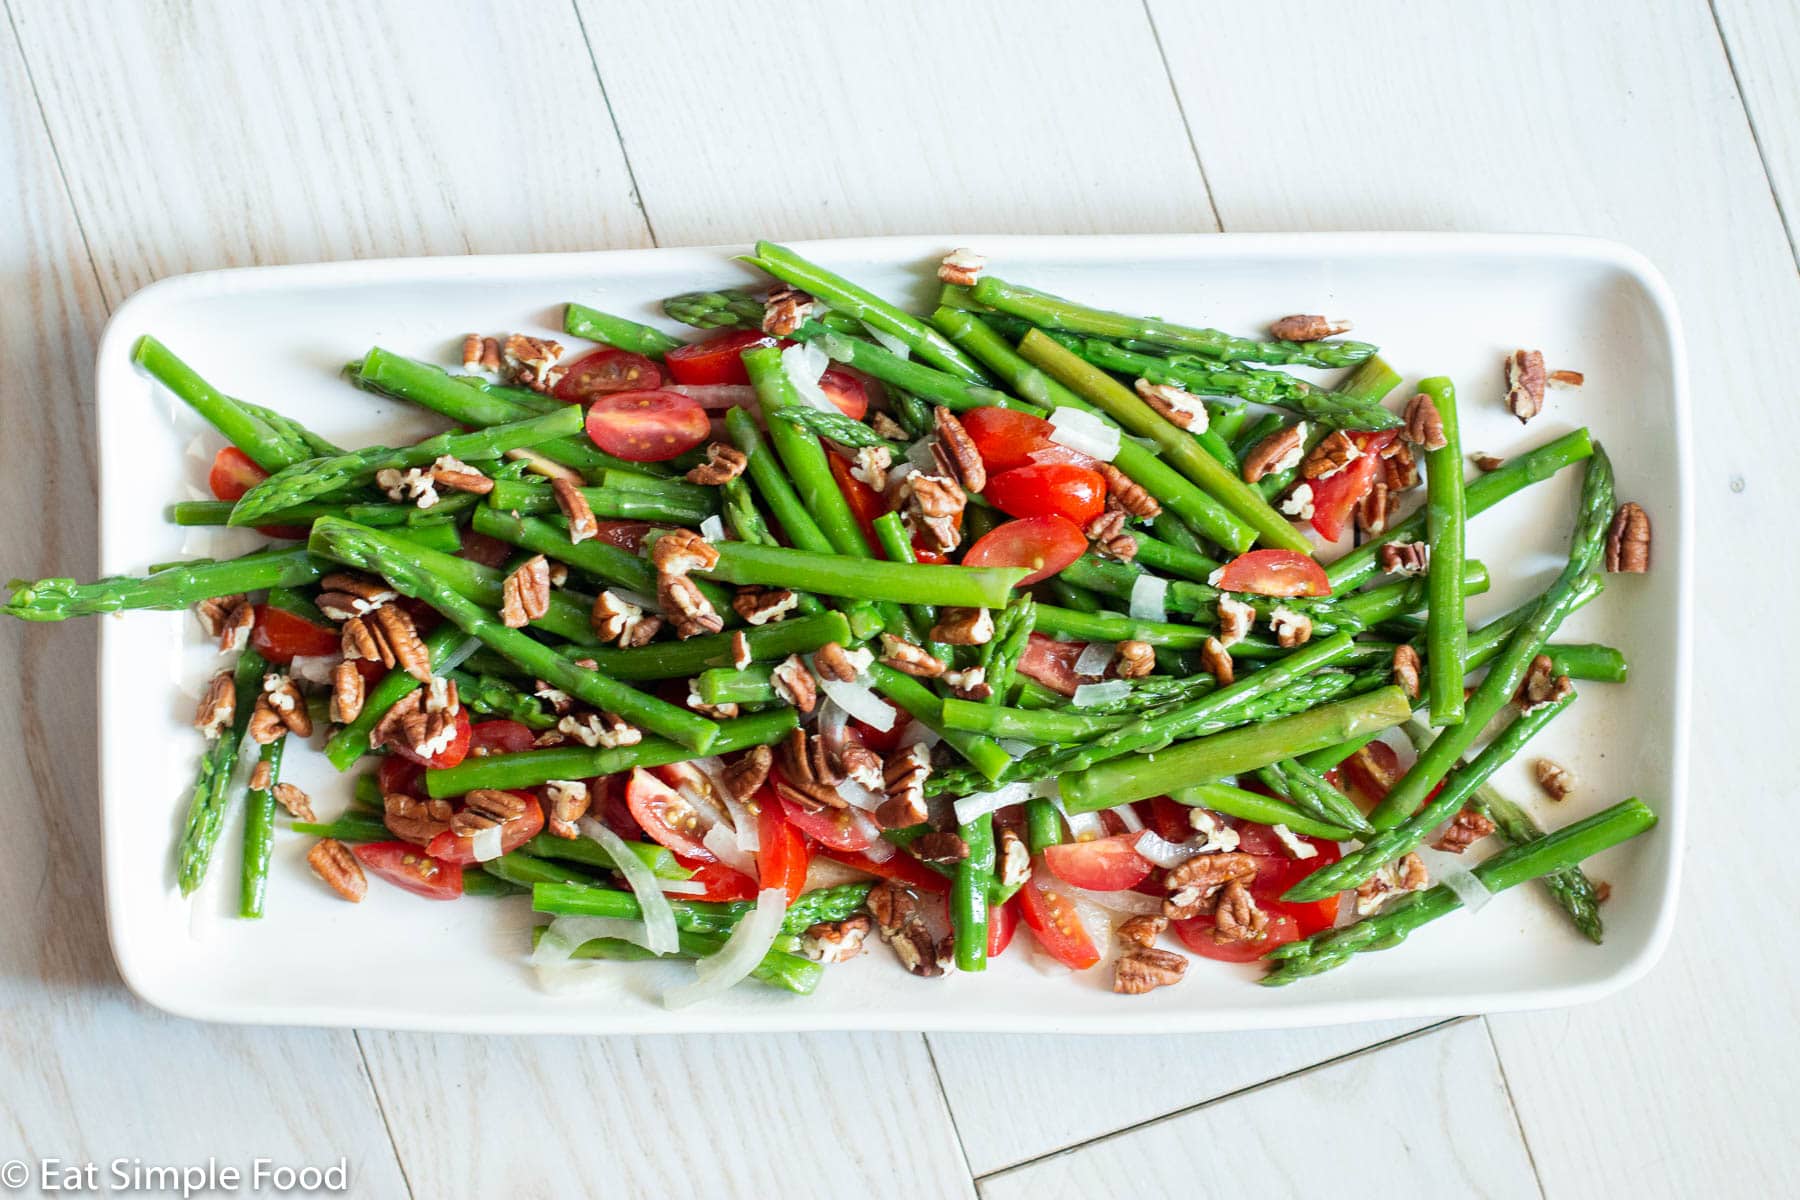 Top view of long white plate with blanched asparagus, raw halved cherry tomatoes, sliced onions, and chopped pecans.